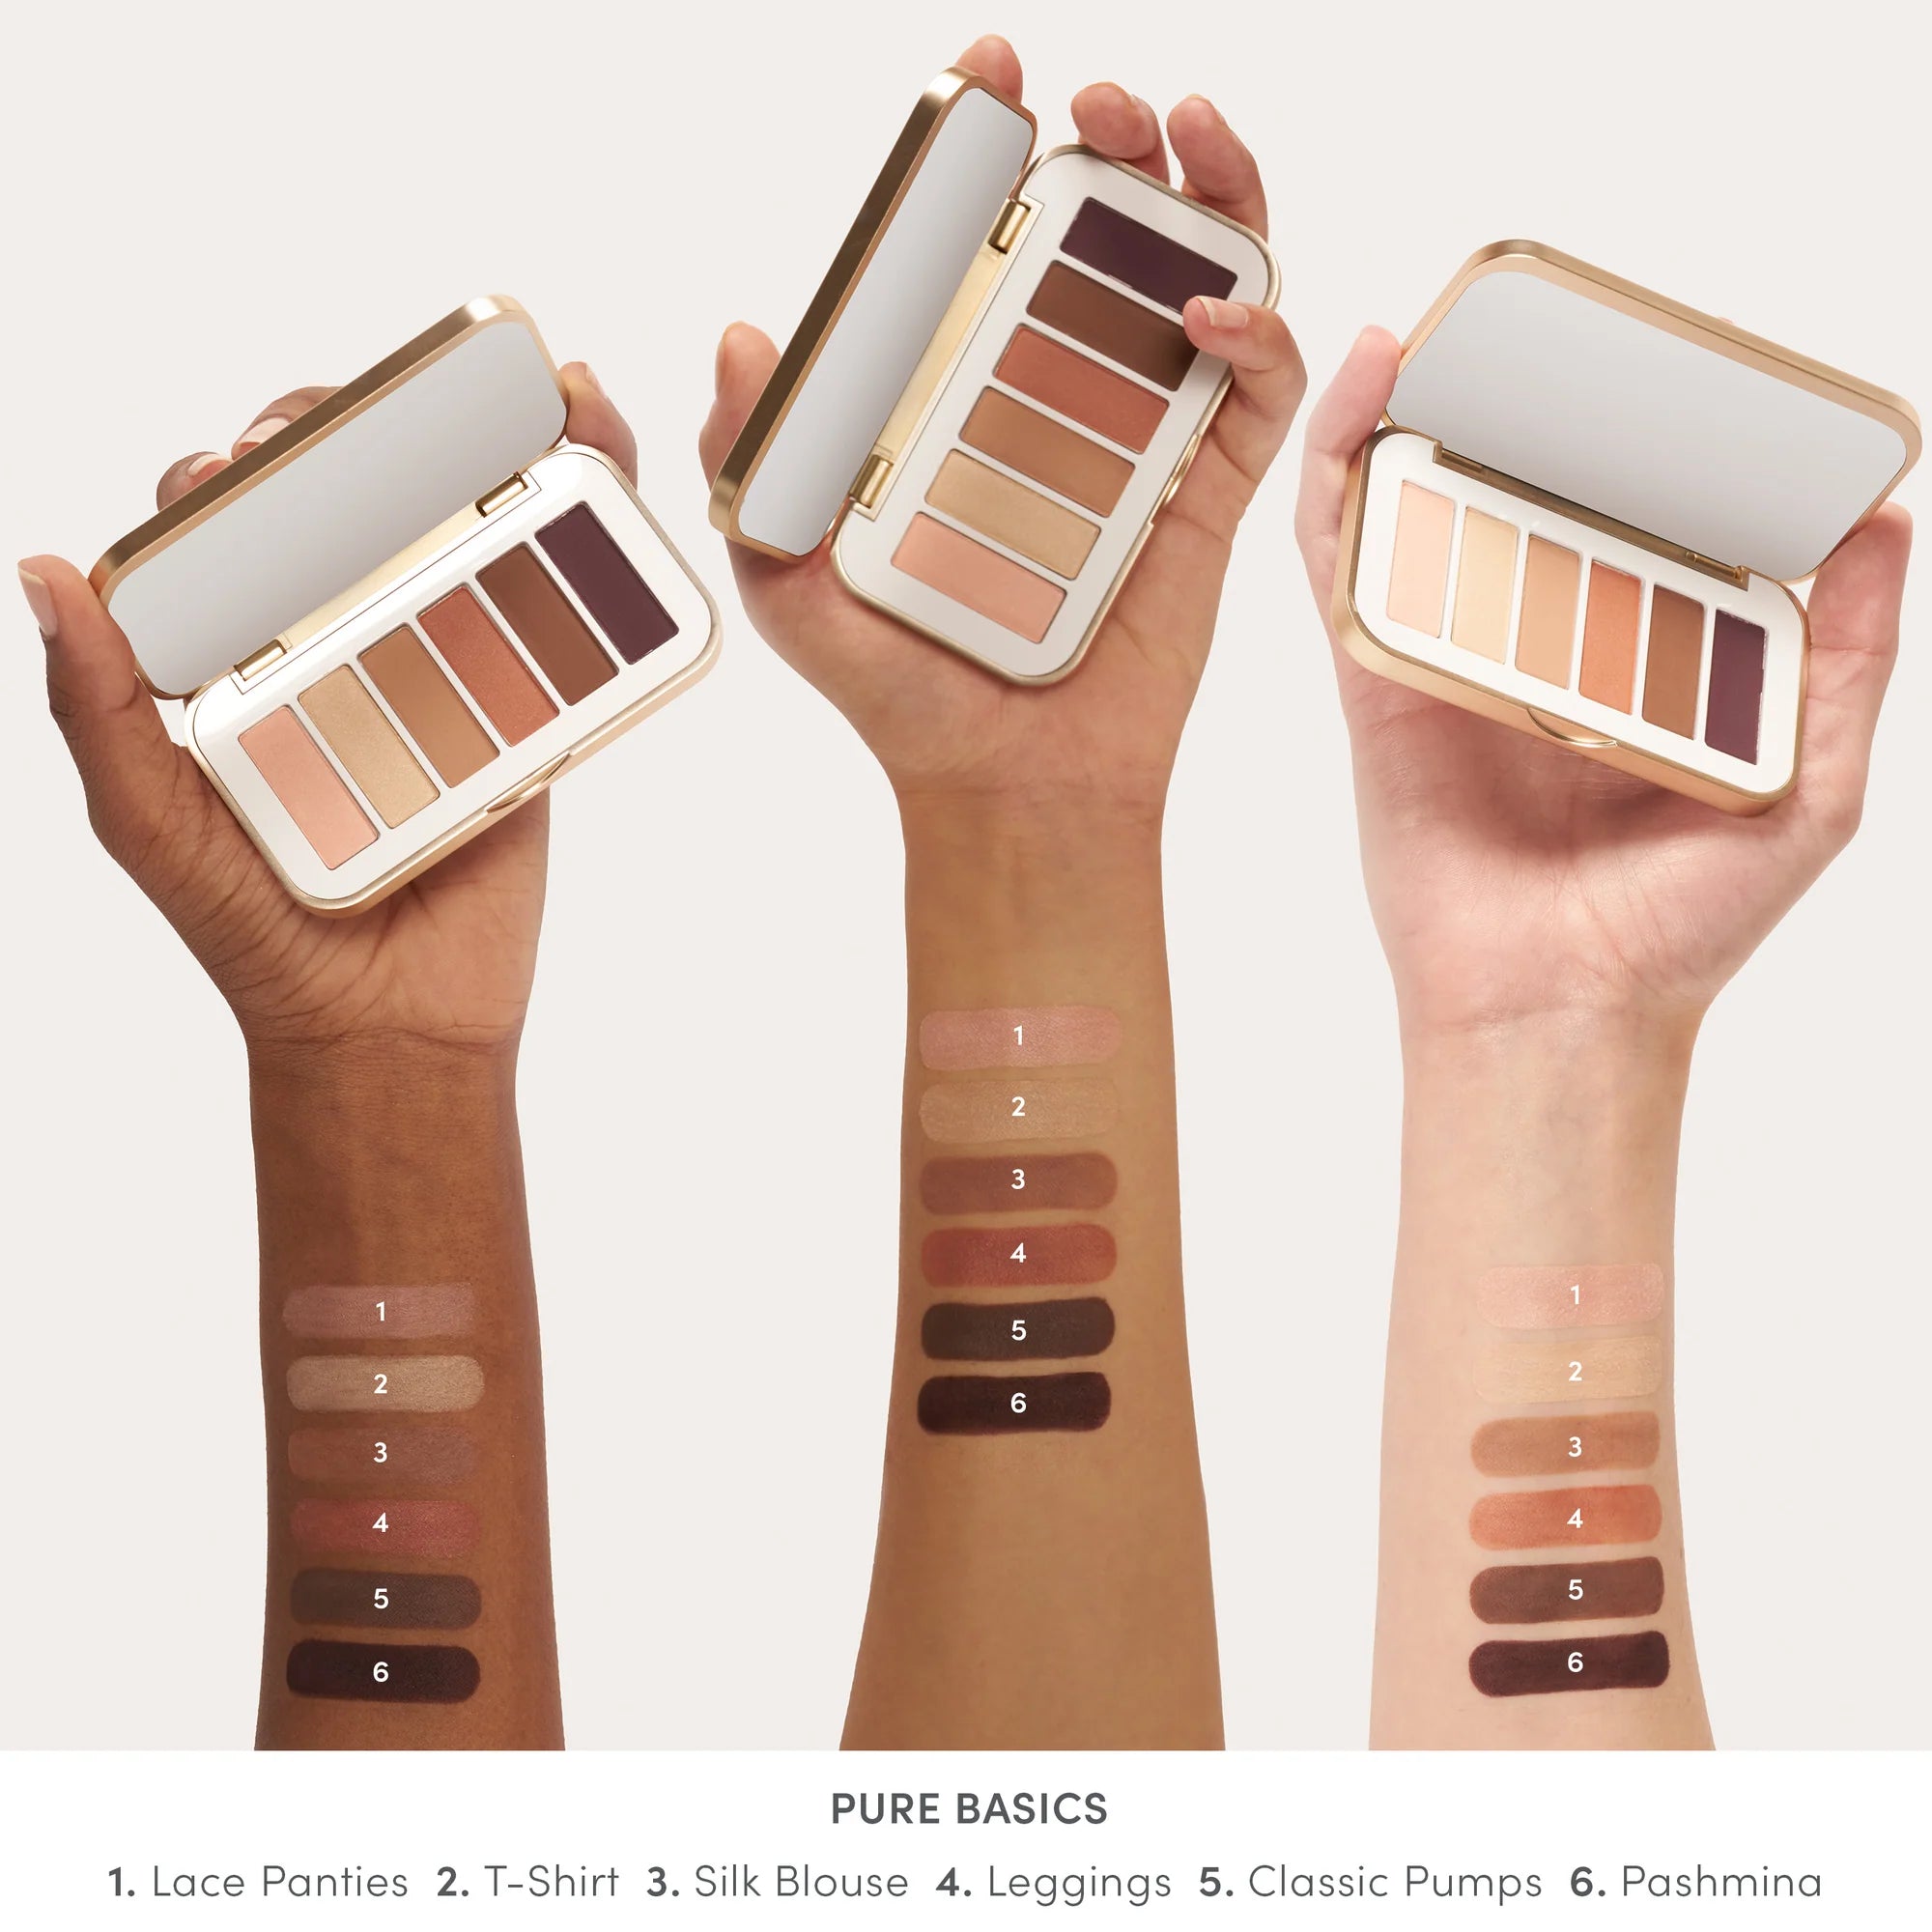 Jane Iredale's PurePressed® Eye Shadow Palette - shade Pure Basics - Lace Panties, T-Shirt, Silk Blouse, Leggings, Classic Pumps, Pashmina swatches